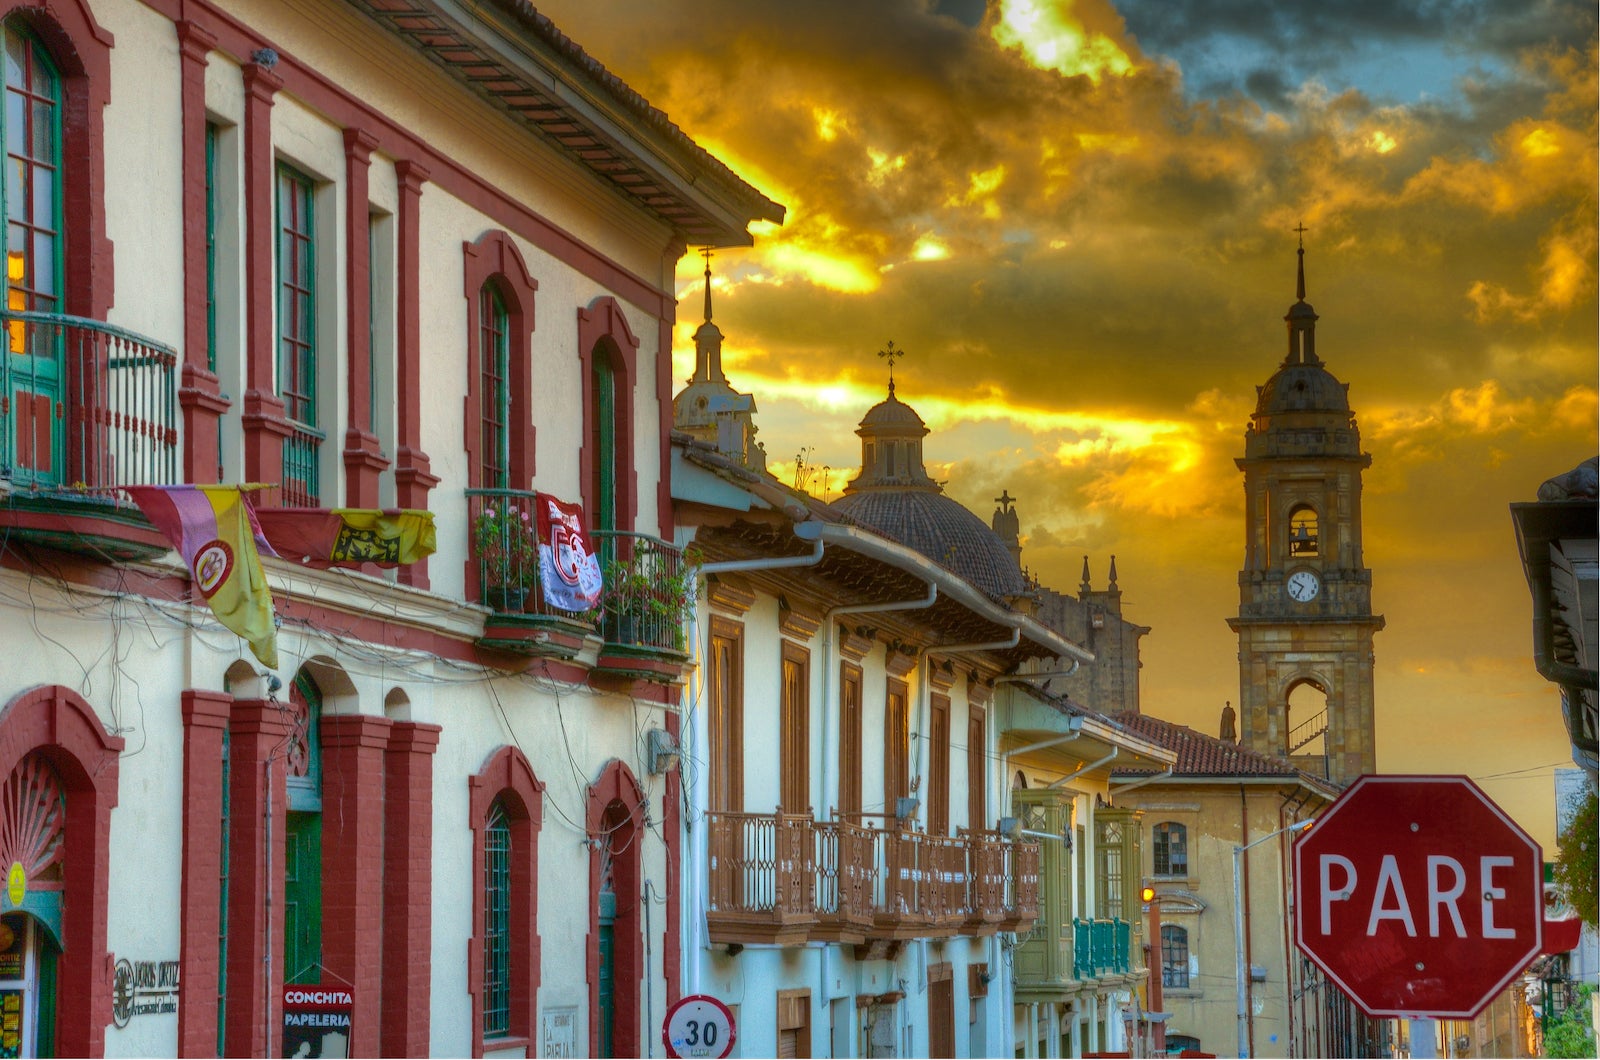 Deal alert: Bogota, Colombia, has wide open availability this fall at discounted prices